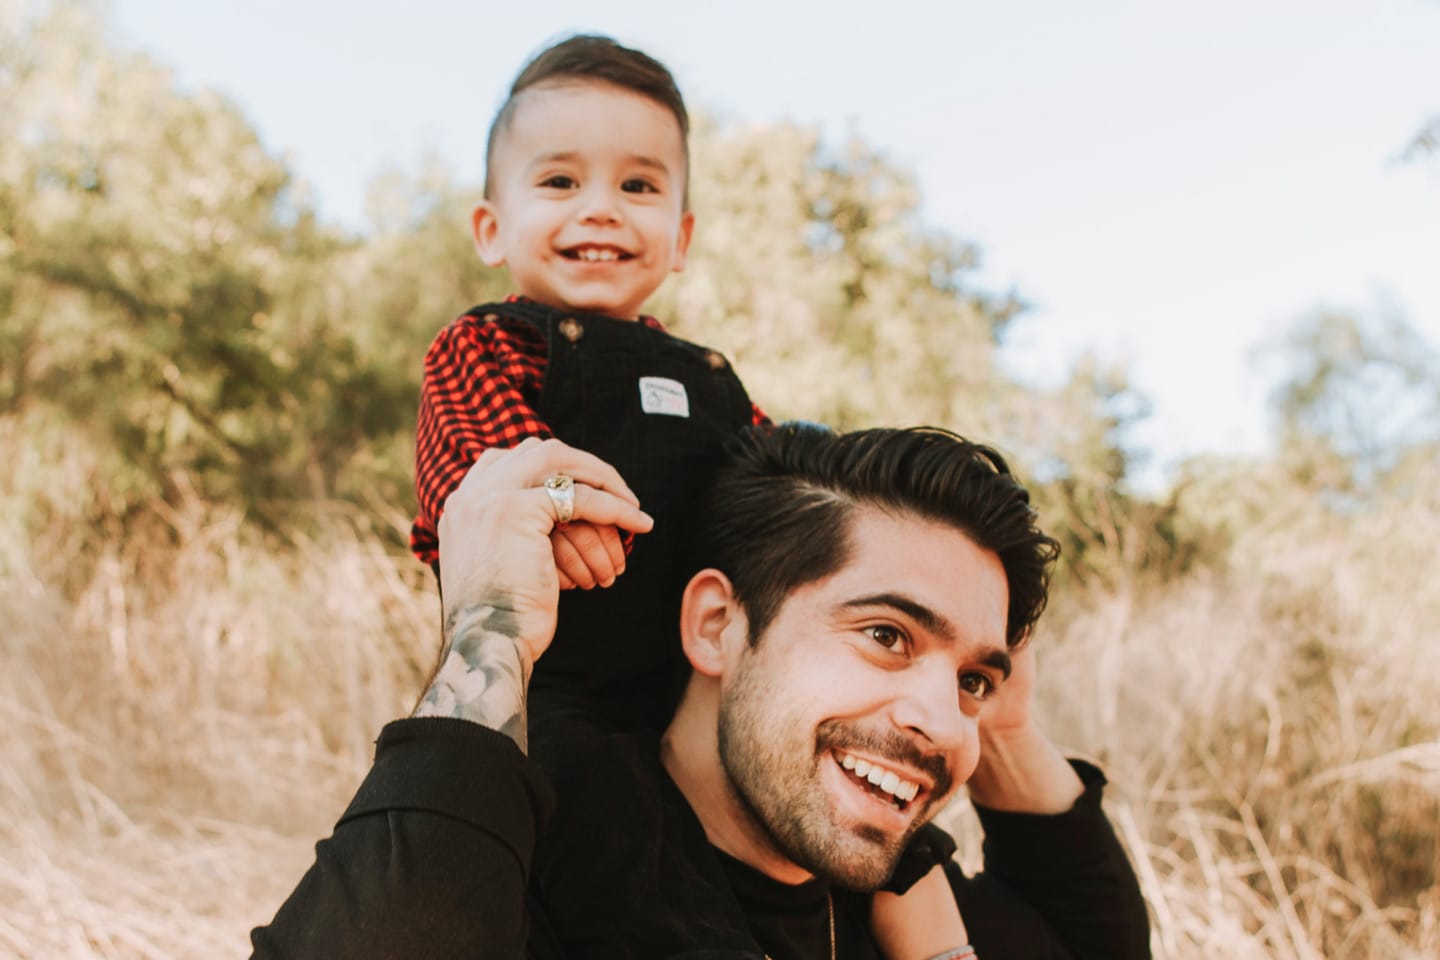 Photograph of a father giving his son a piggy-back ride in the middle of a field